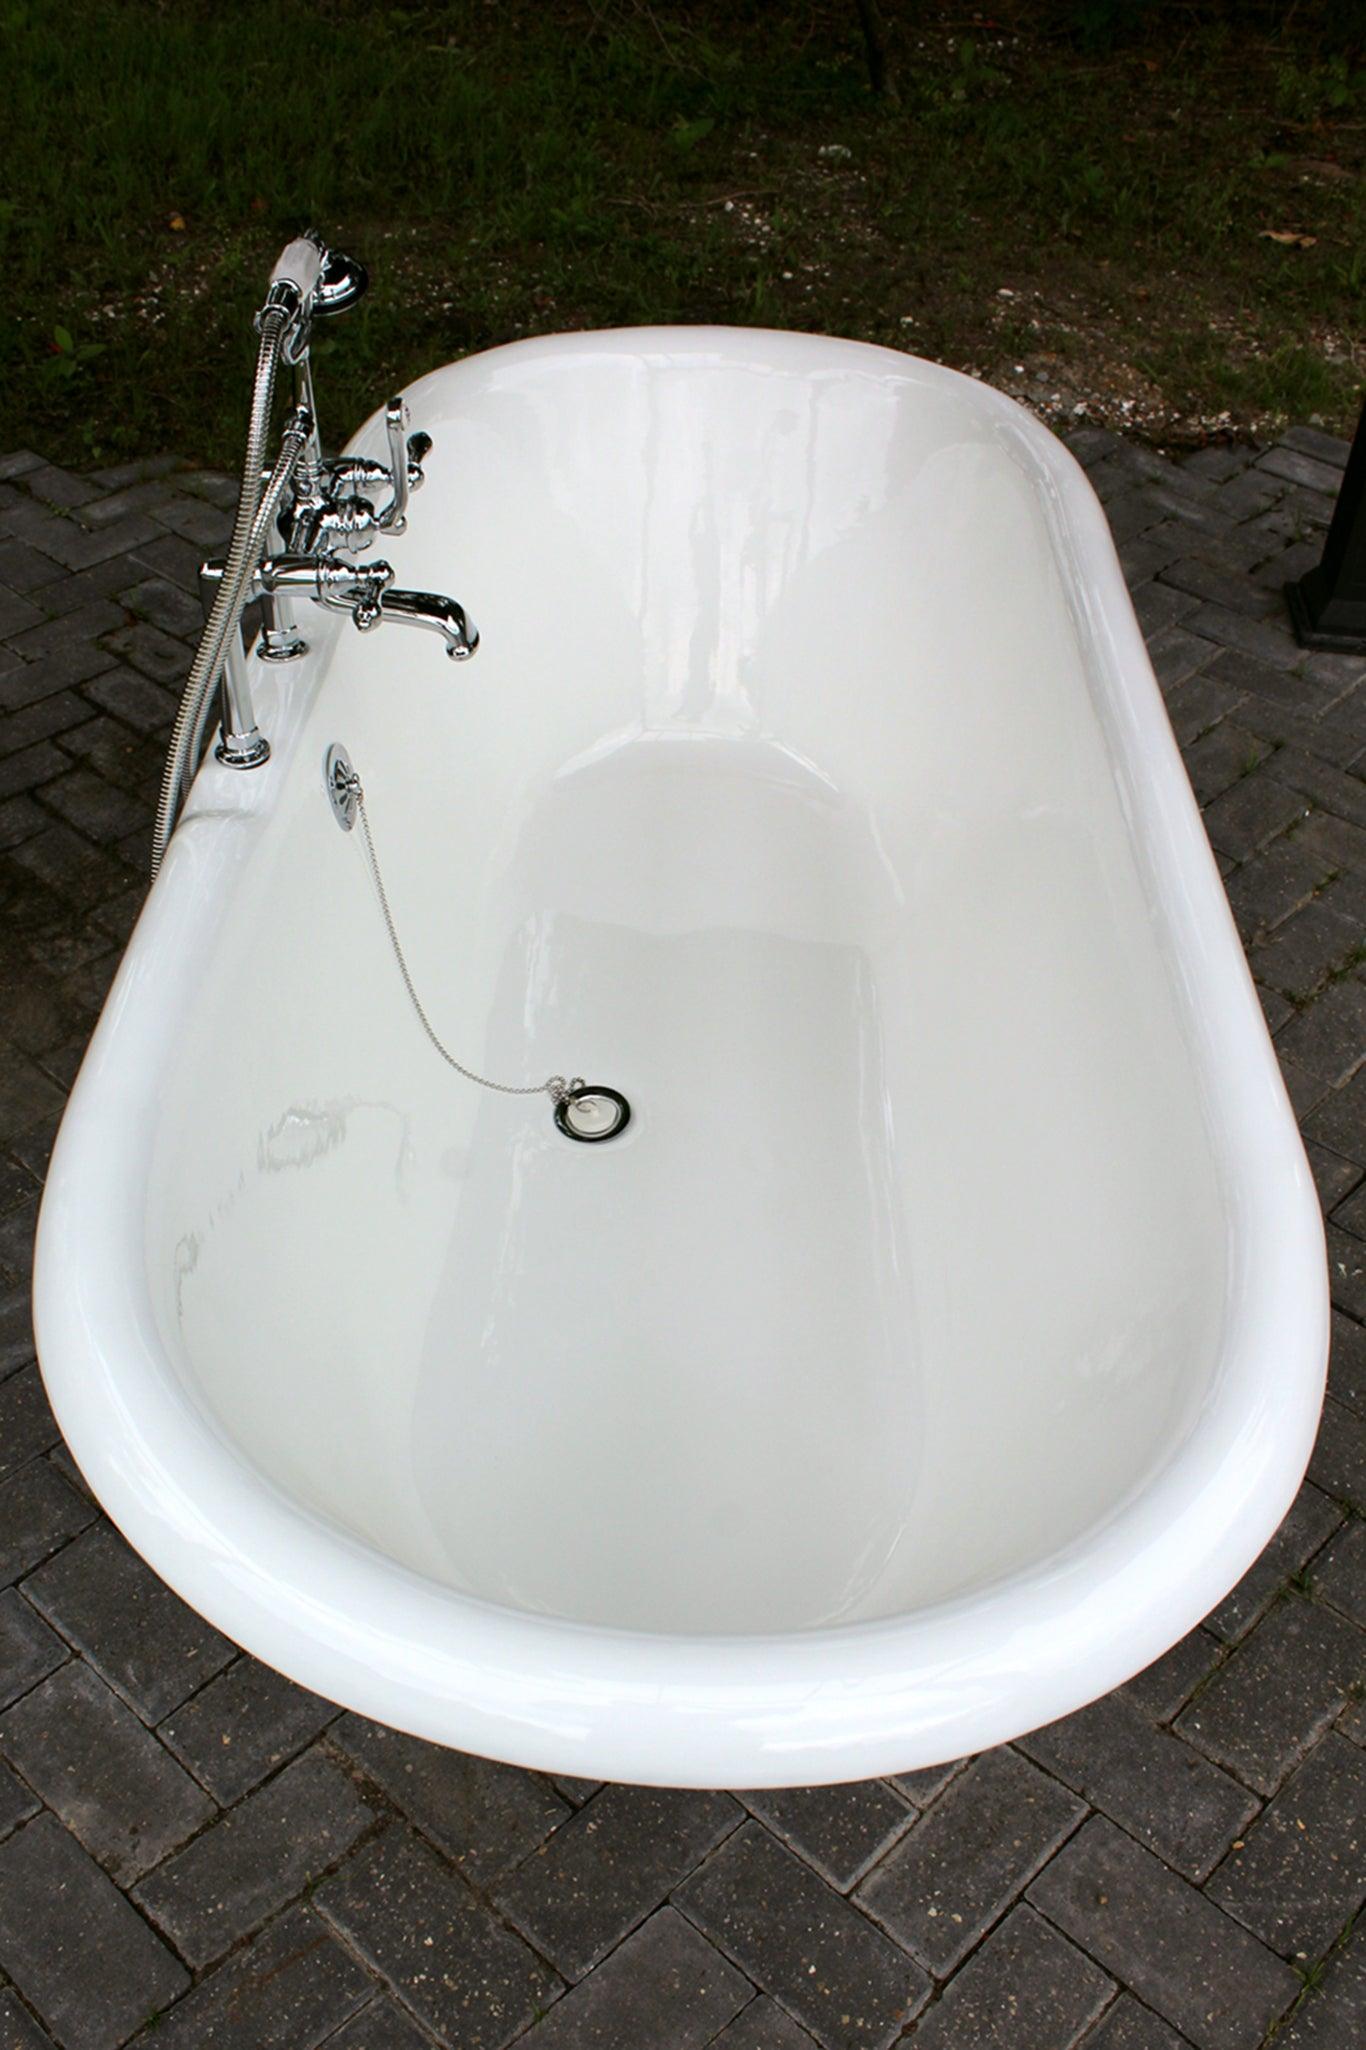 WatermarkFixtures Double Ended 72″ Antique Inspired Cast Iron Clawfoot Bathtub - Bright White - Bathroom Design Center